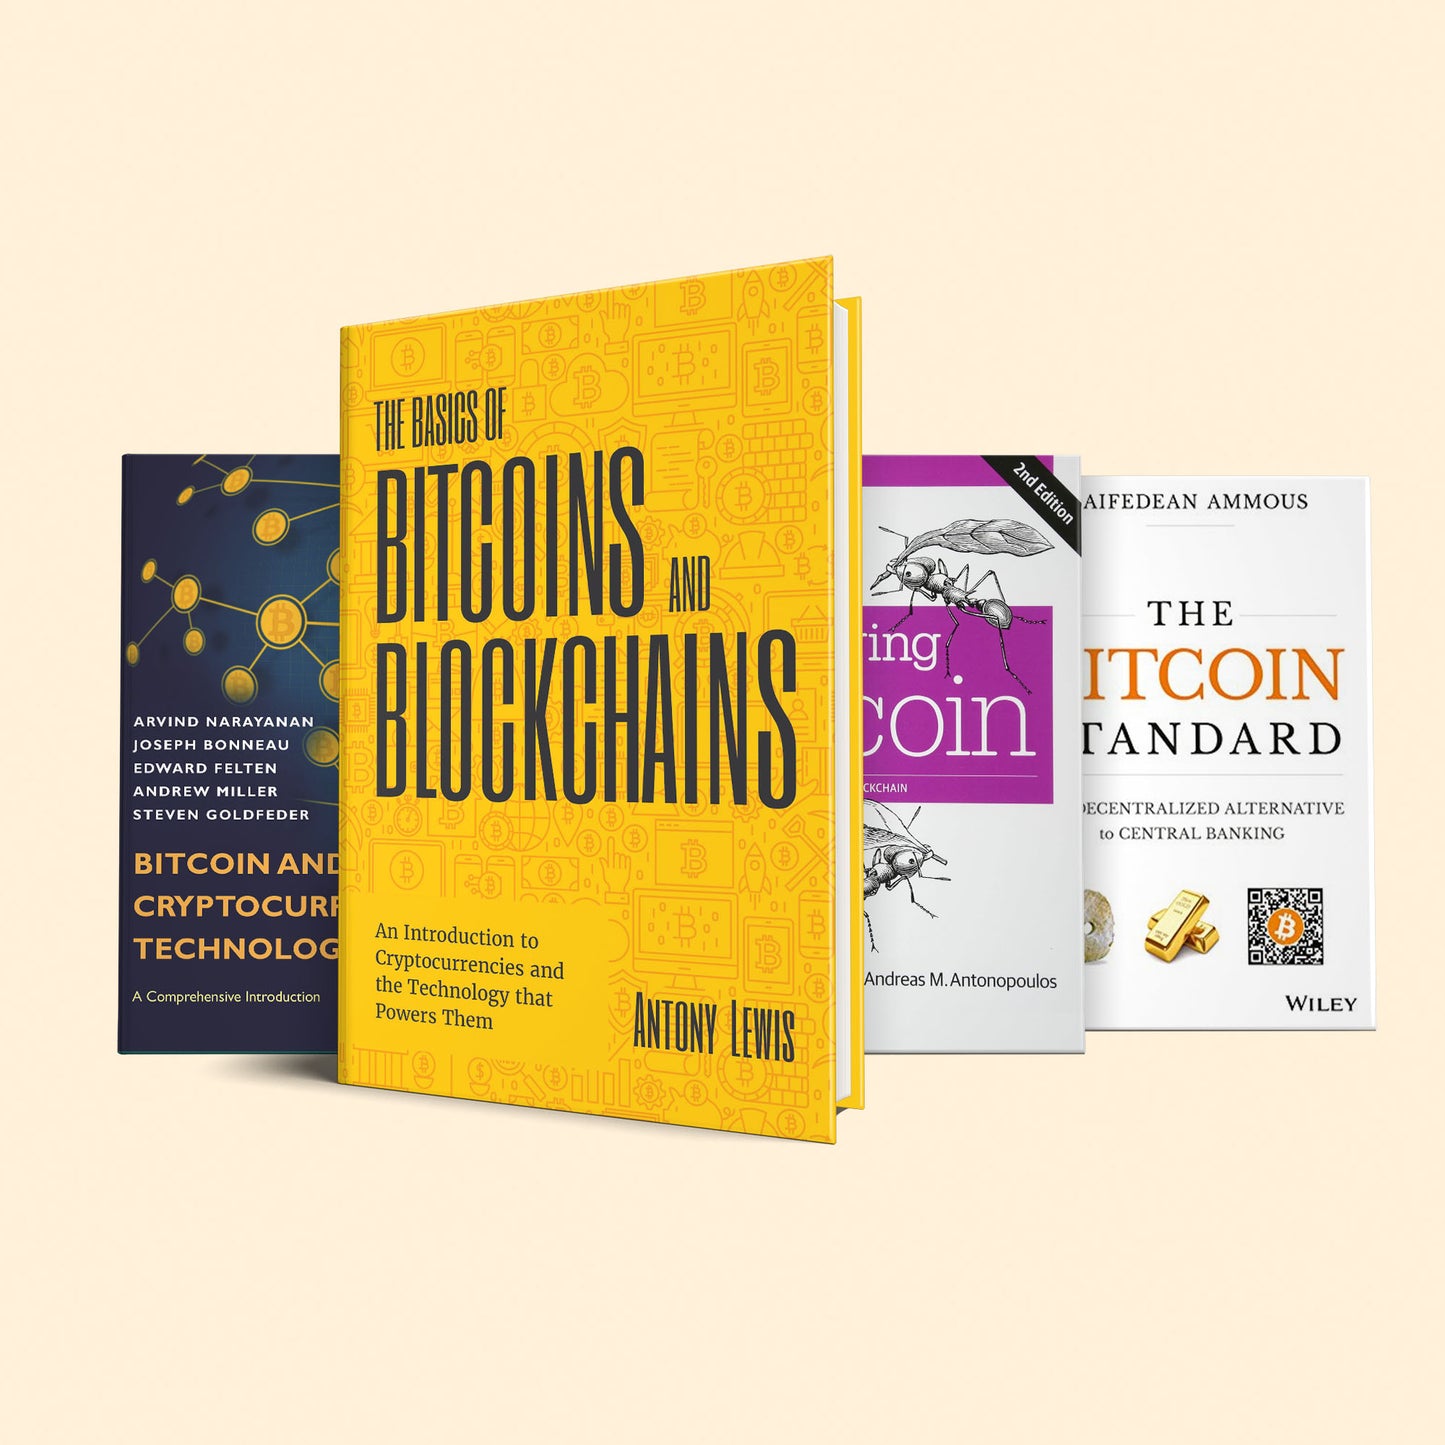 4 Books to get you into the web 3.0: (The Basics of Bitcoins and Blockchains, Mastering bitcoin, The Bitcoin Standard, Bitcoin and Cryptocurrency Technologies)